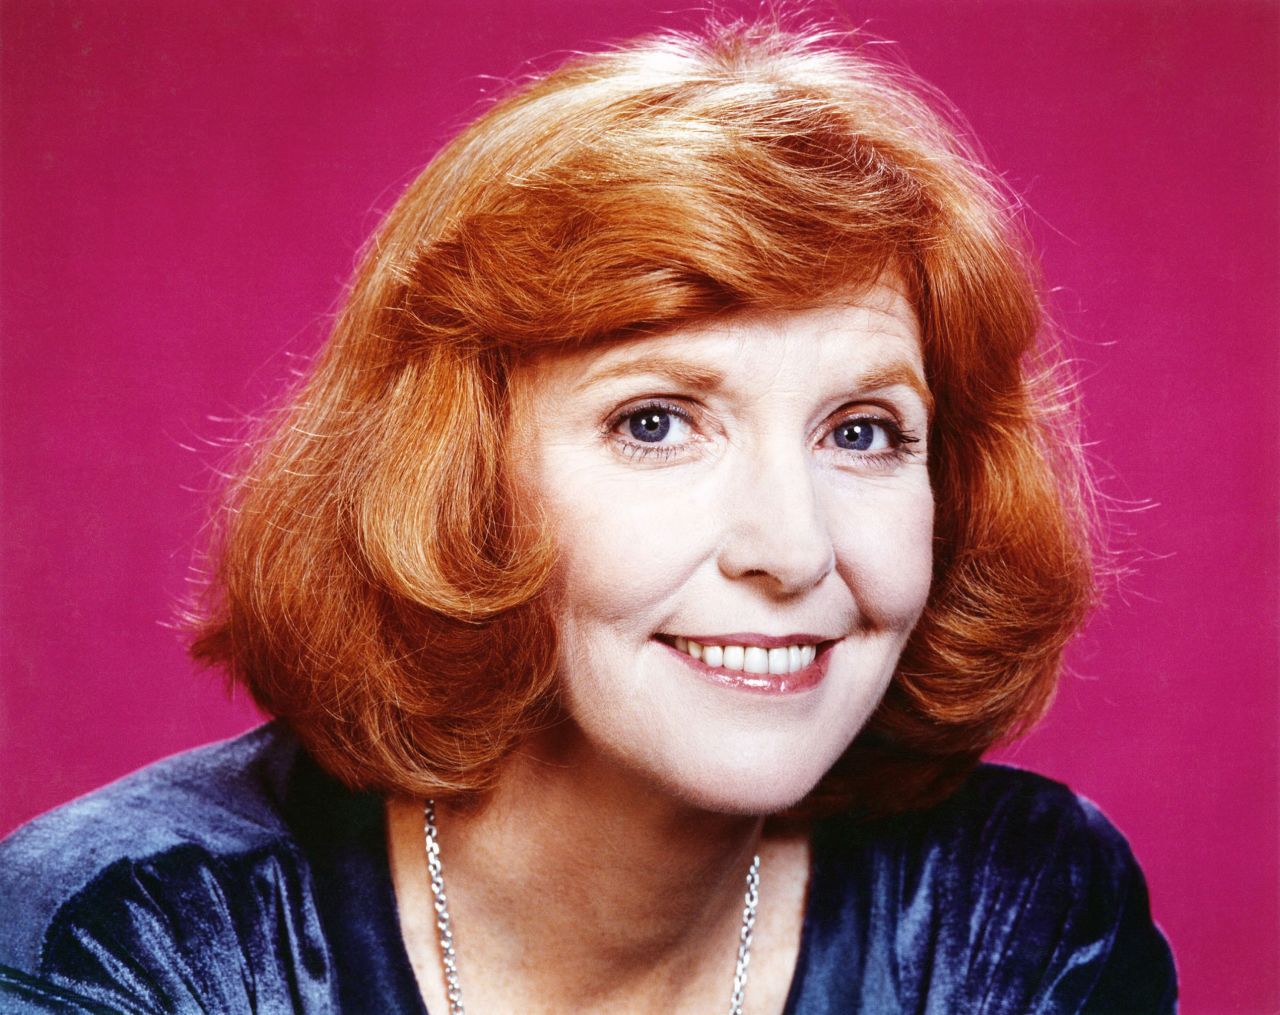 Comedy great <a href="http://www.cnn.com/2015/05/24/entertainment/feat-anne-meara-dies/index.html" target="_blank">Anne Meara</a>, wife of Jerry Stiller and mother of Ben Stiller, died on May 23, according to a statement from her family. She was 85. 